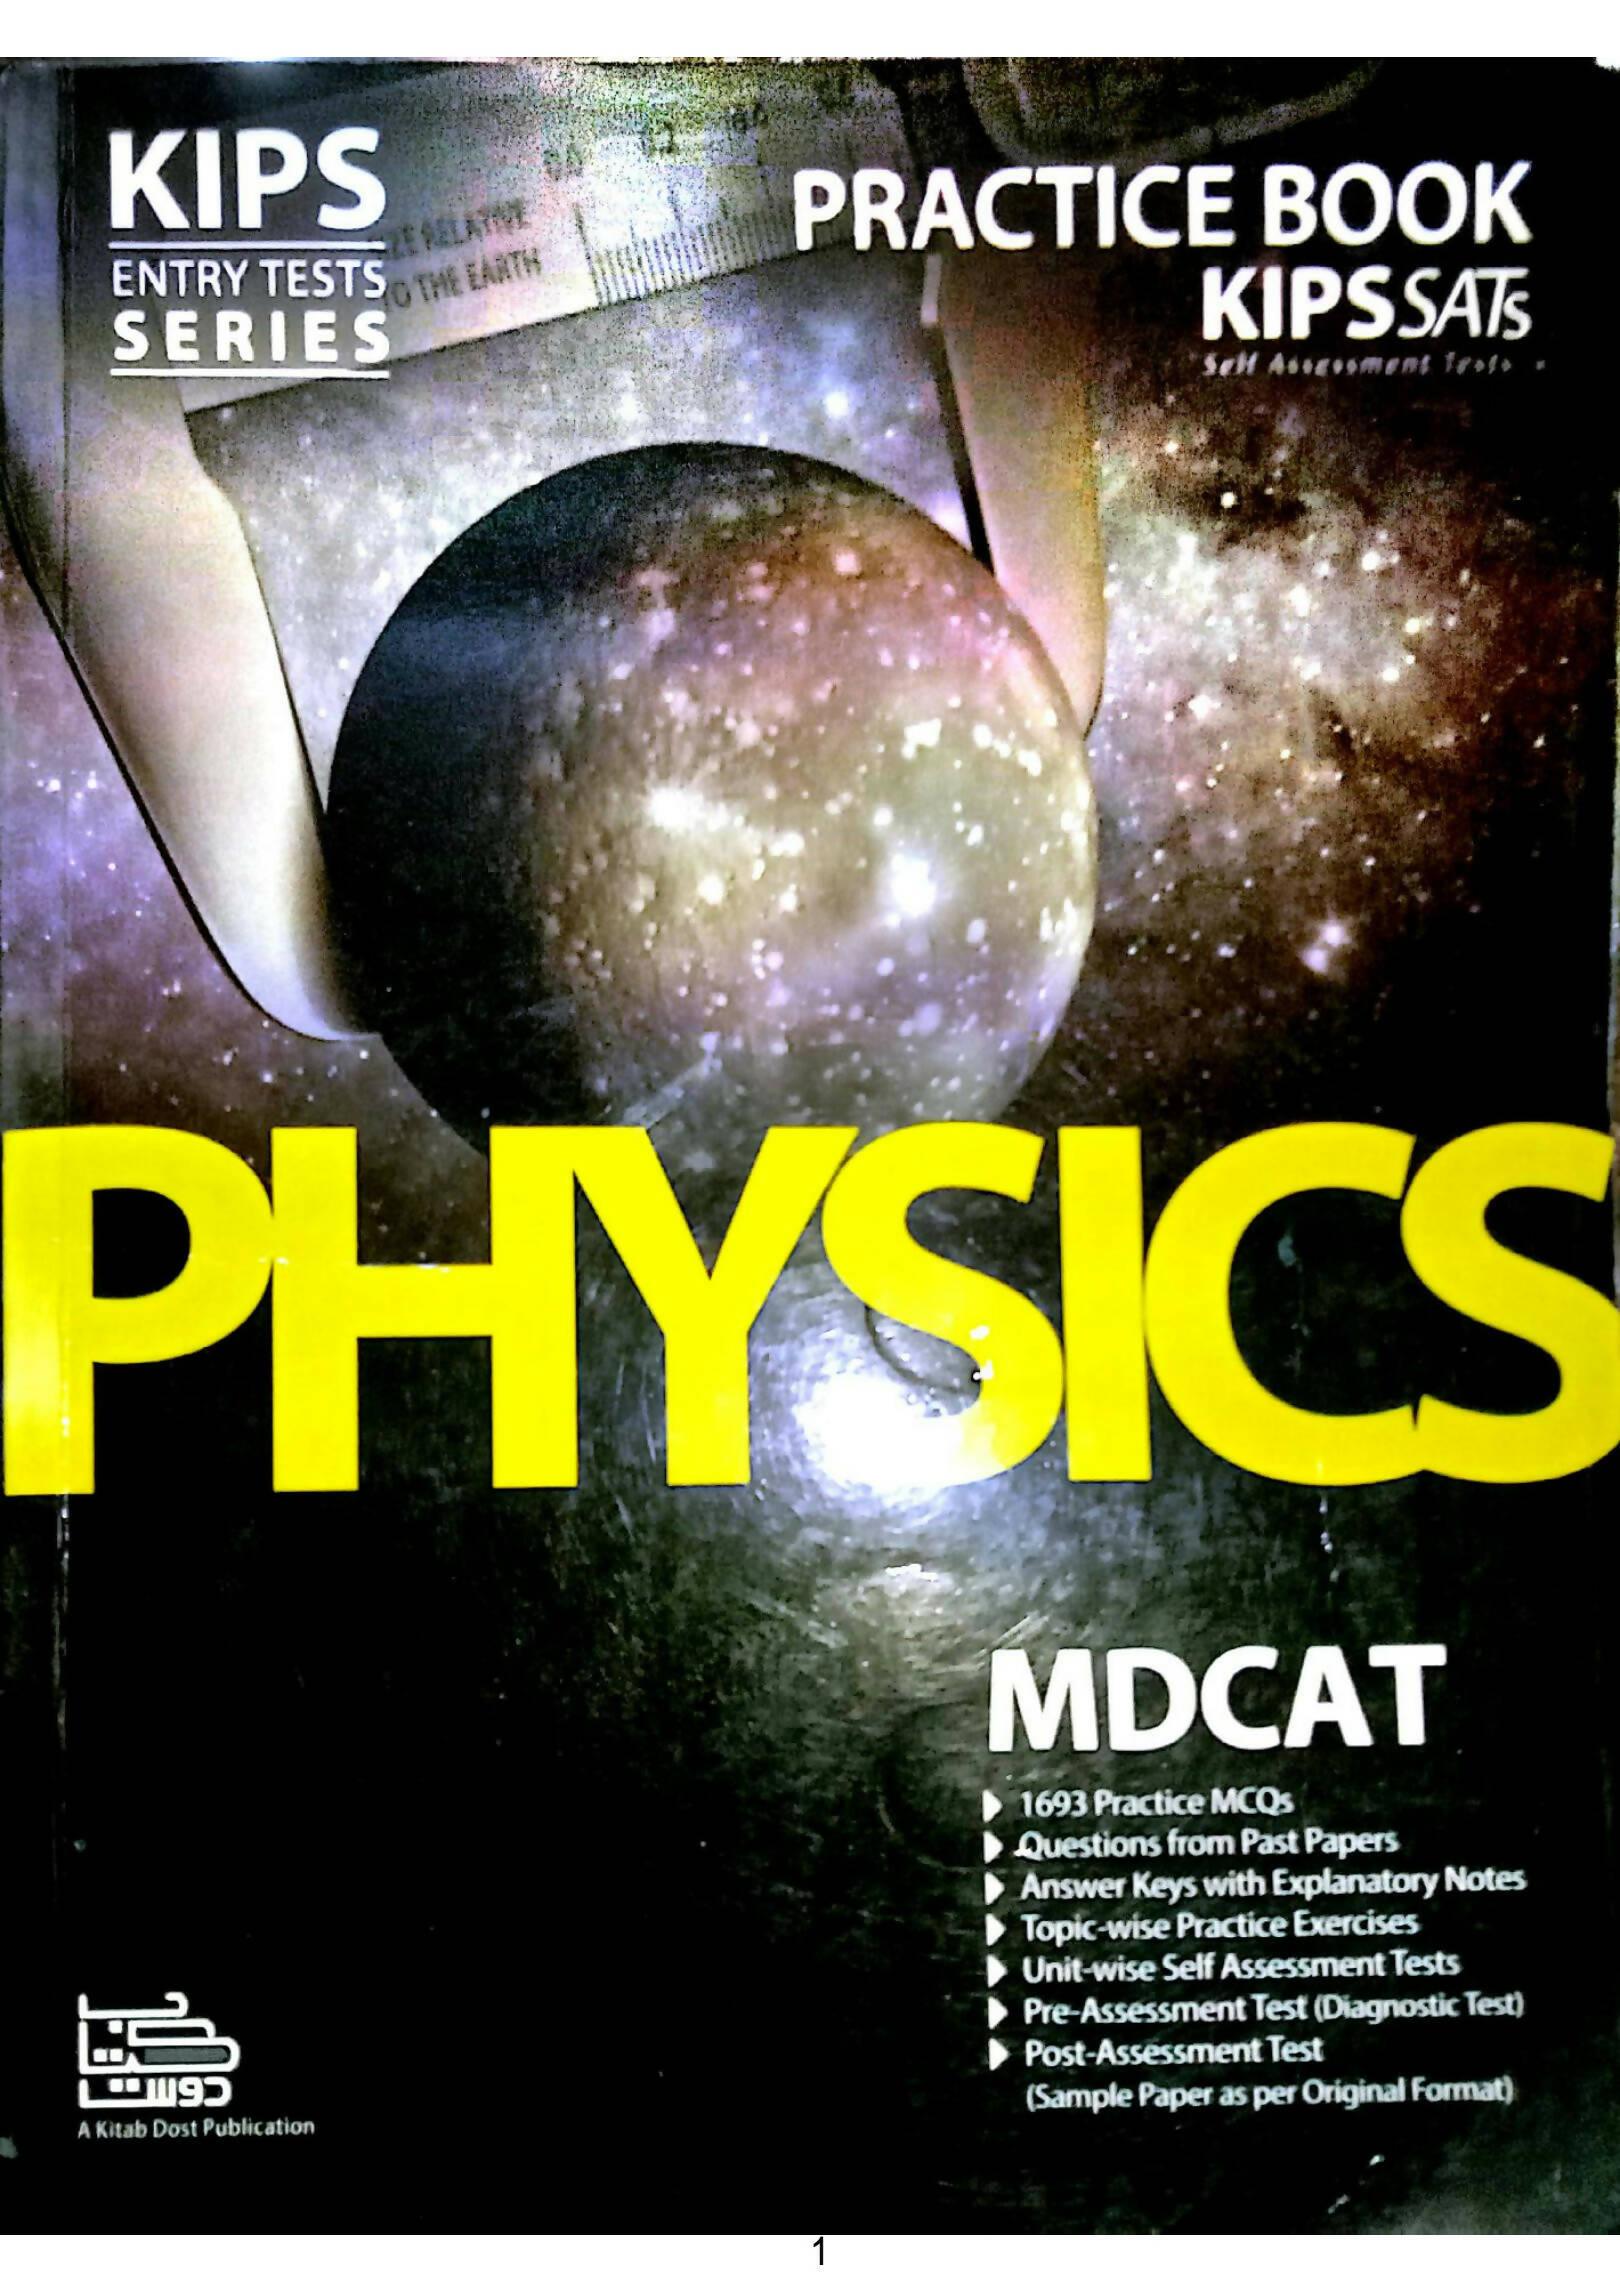 KIPS ENTRY TESTS SERIES PHYSICS MDCAT AS PER PMC SYLLABUS - ValueBox